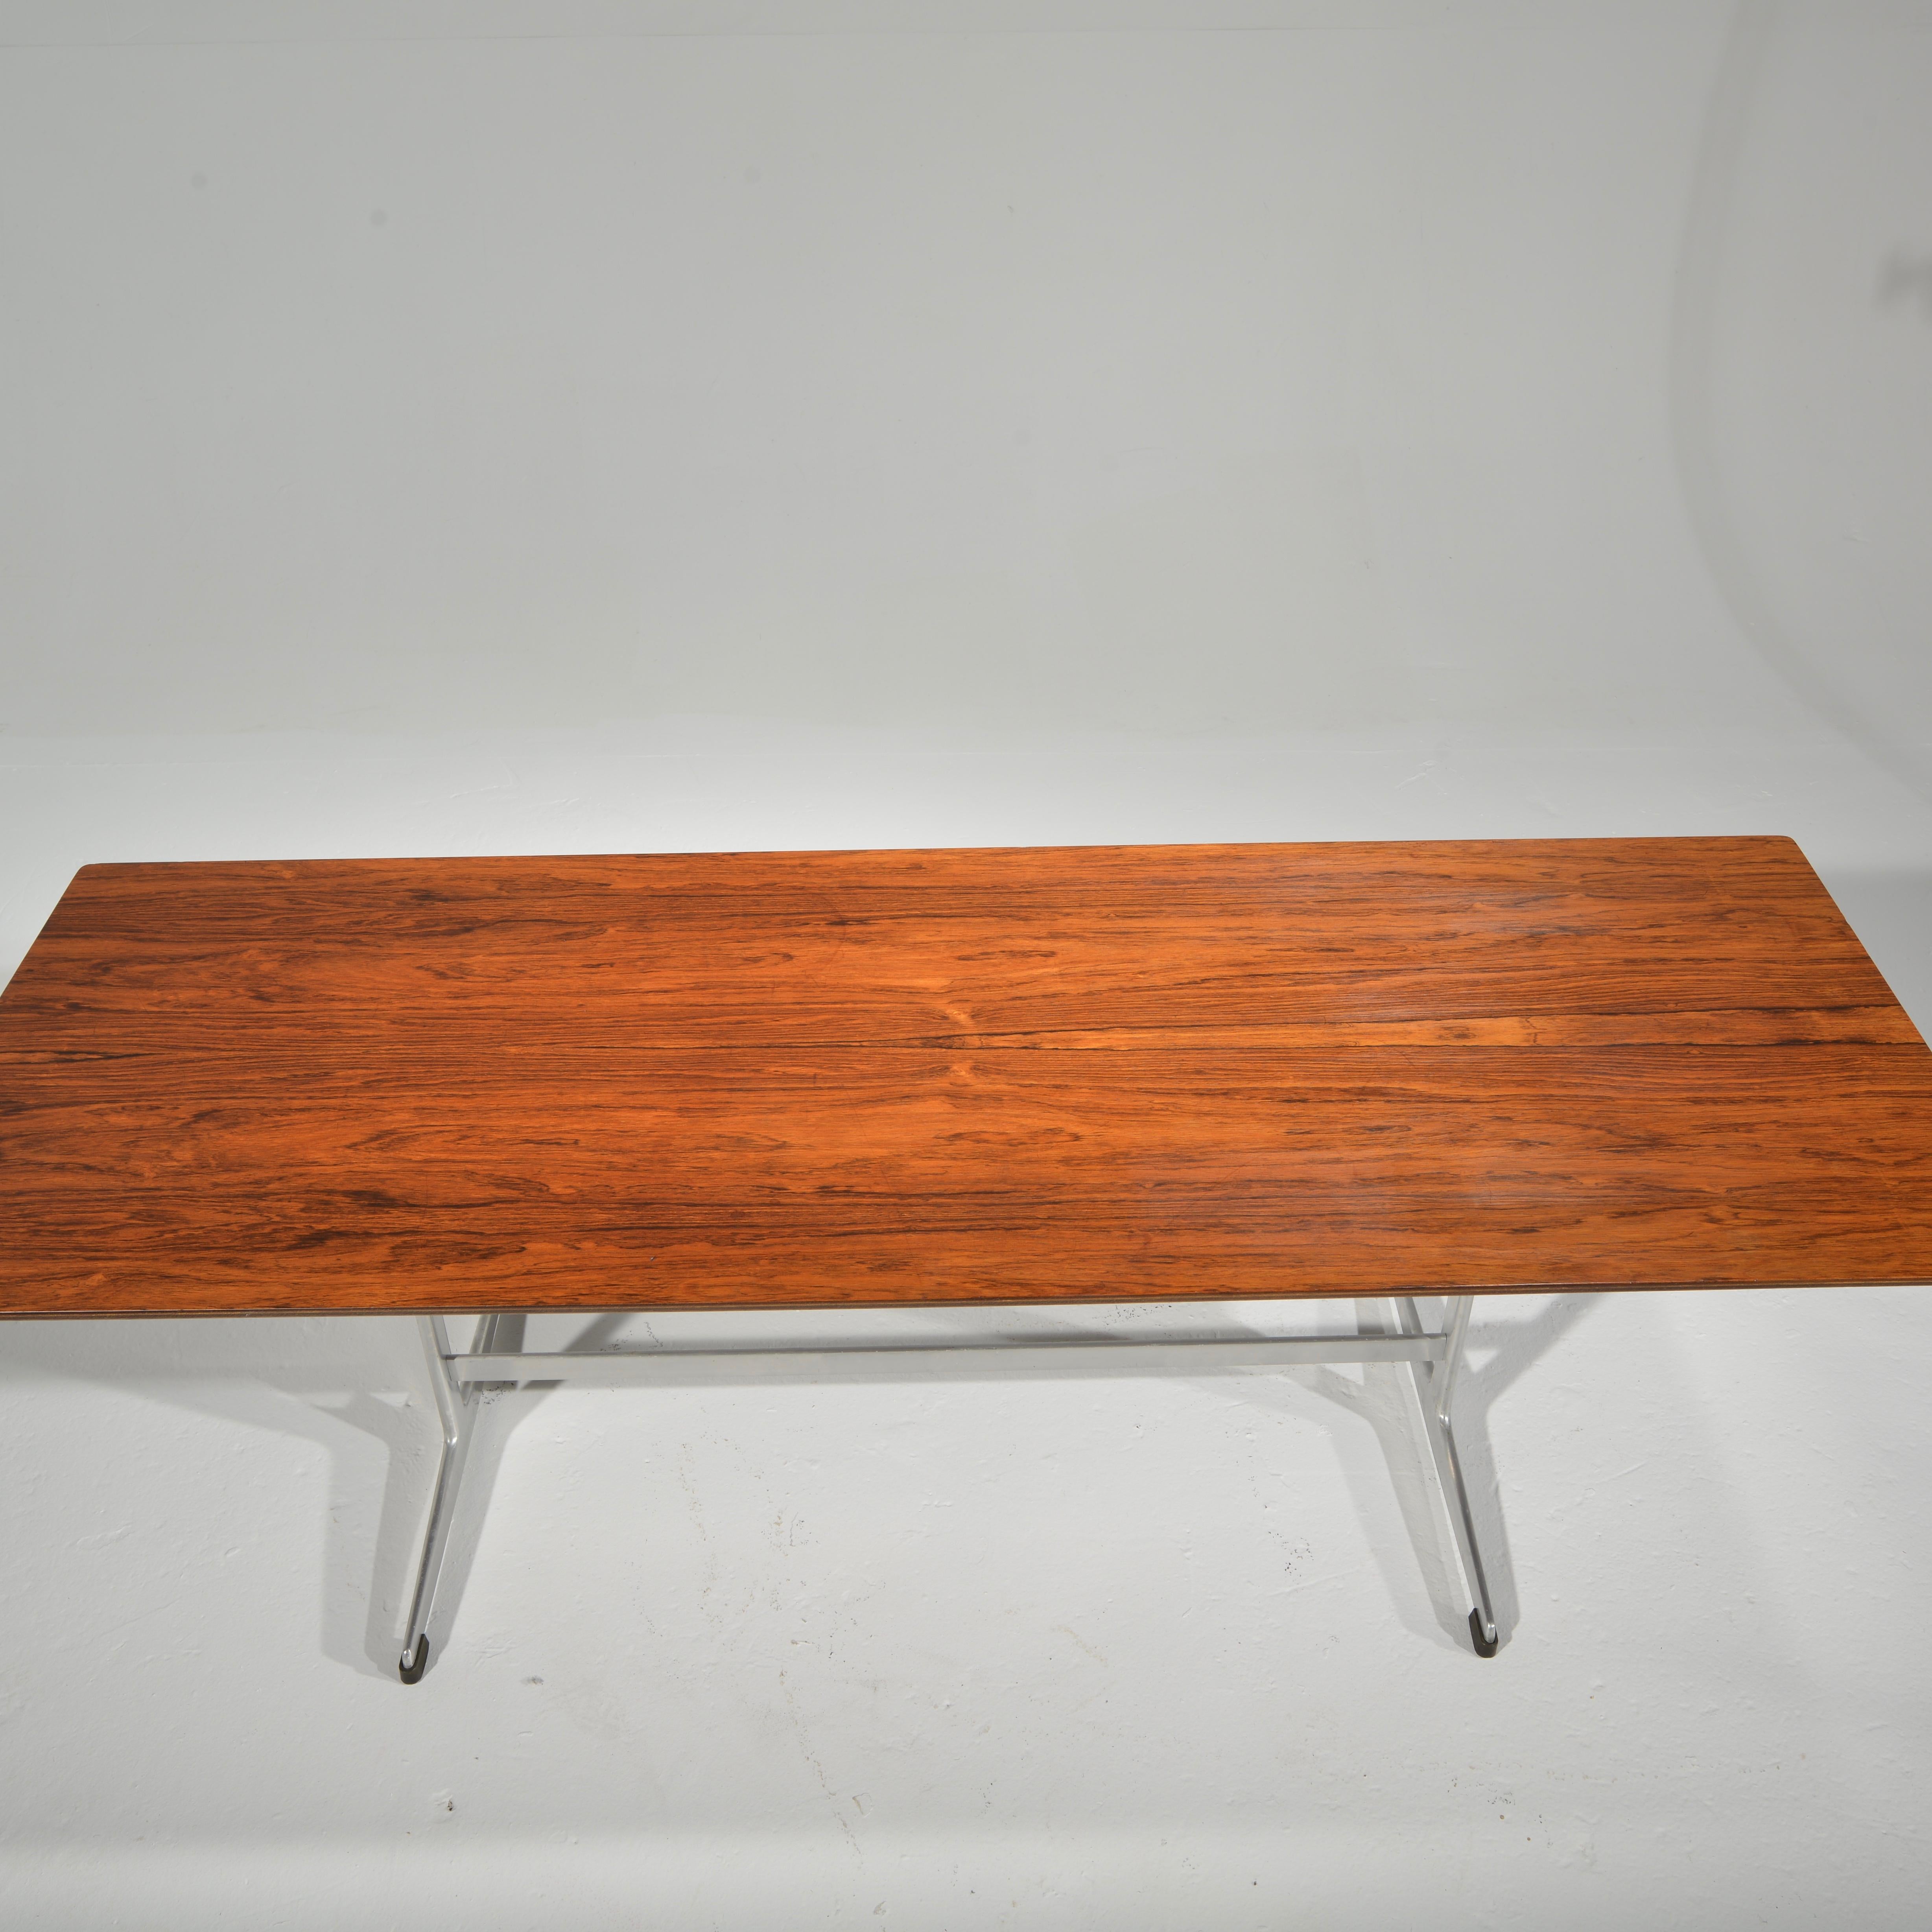 Danish Rare Arne Jacobsen Rosewood Coffee Table For Sale